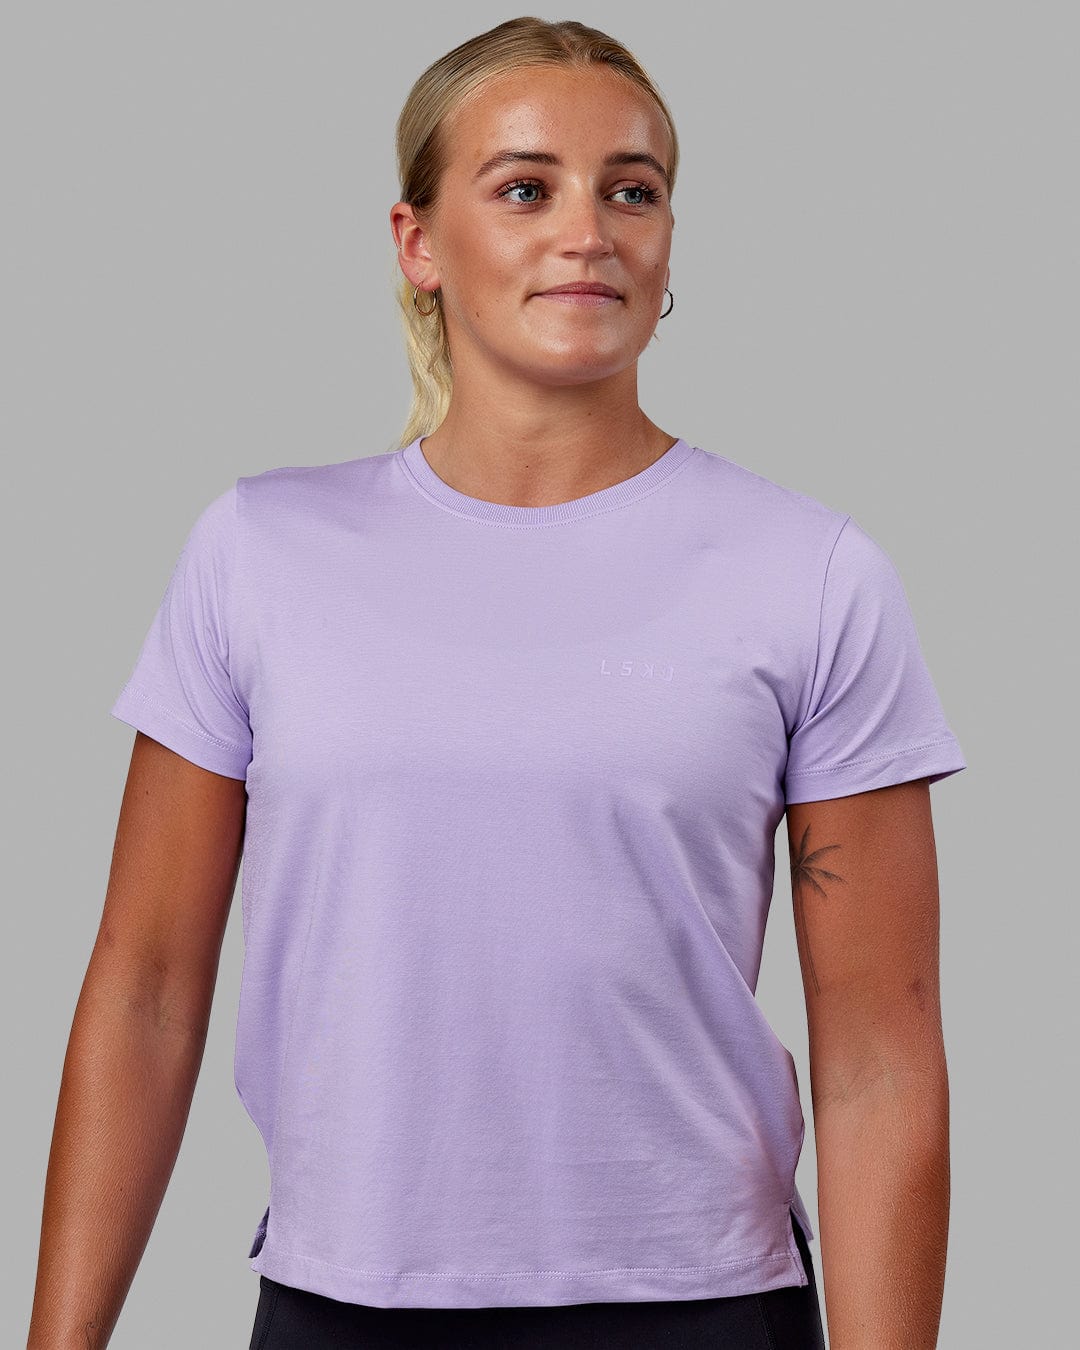 Woman wearing Deluxe PimaFLX Tee - Pale Lilac